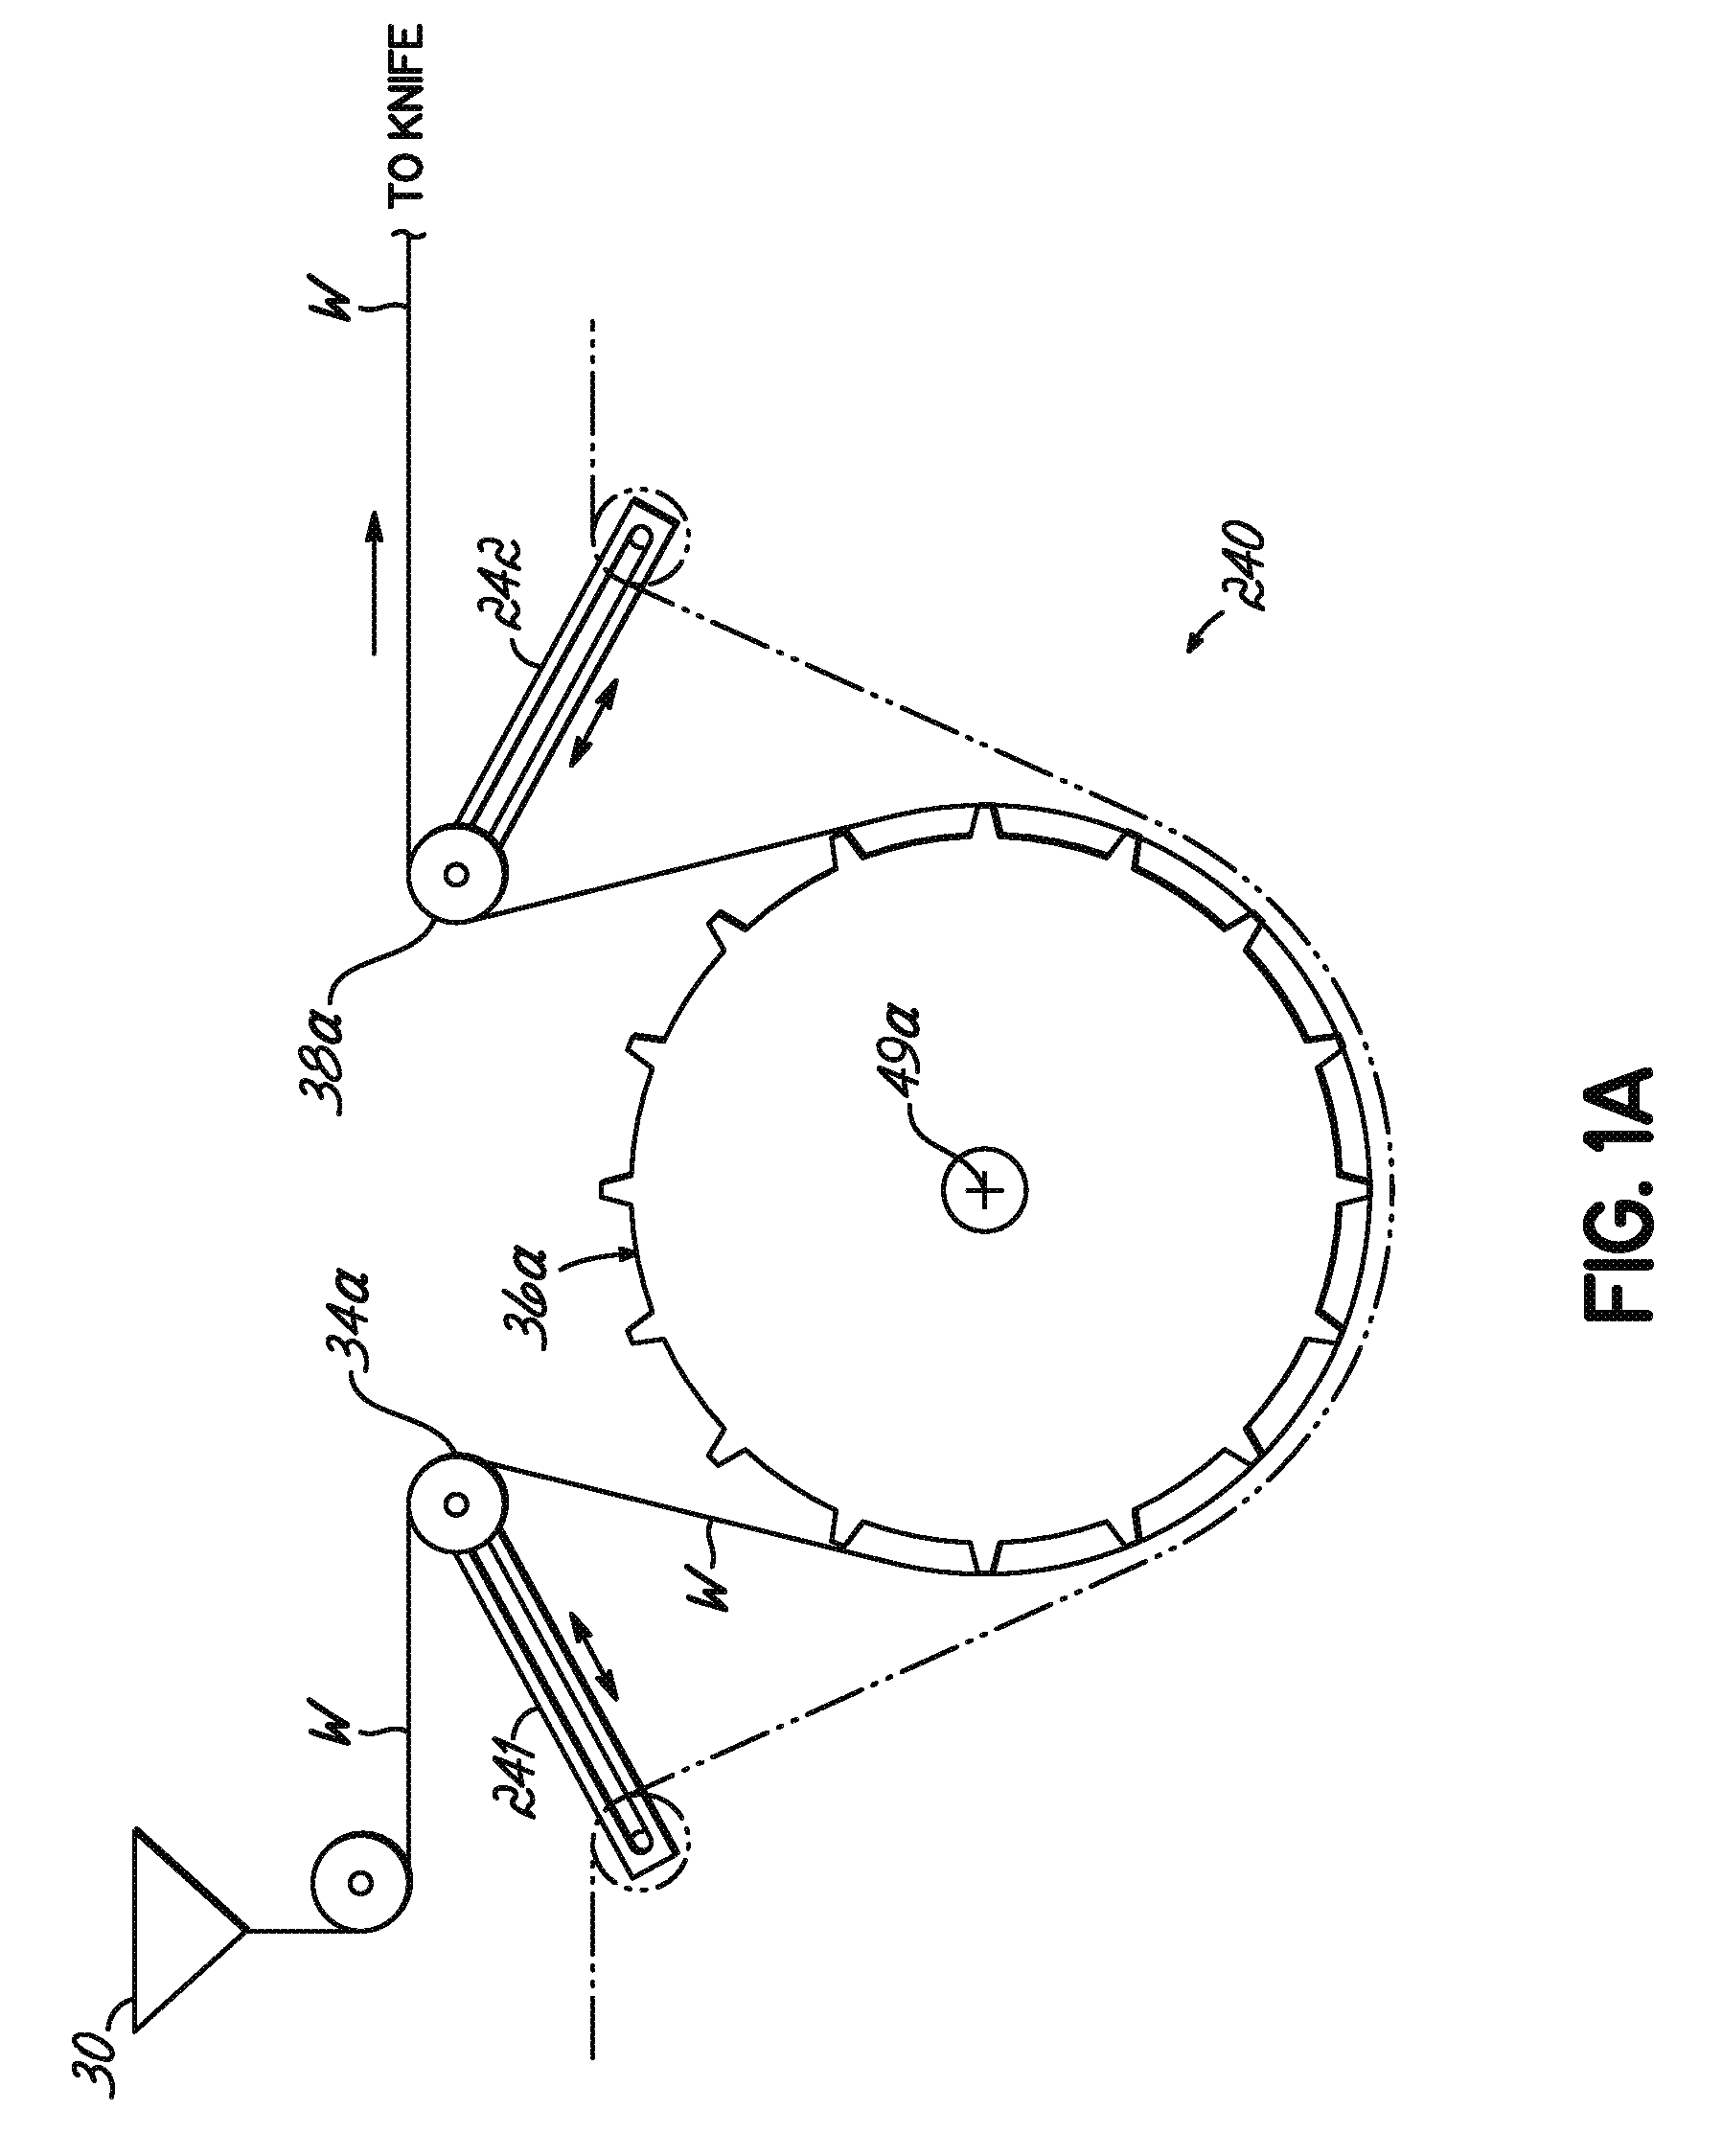 Adjustable pouch forming, filling and sealing apparatus and methods